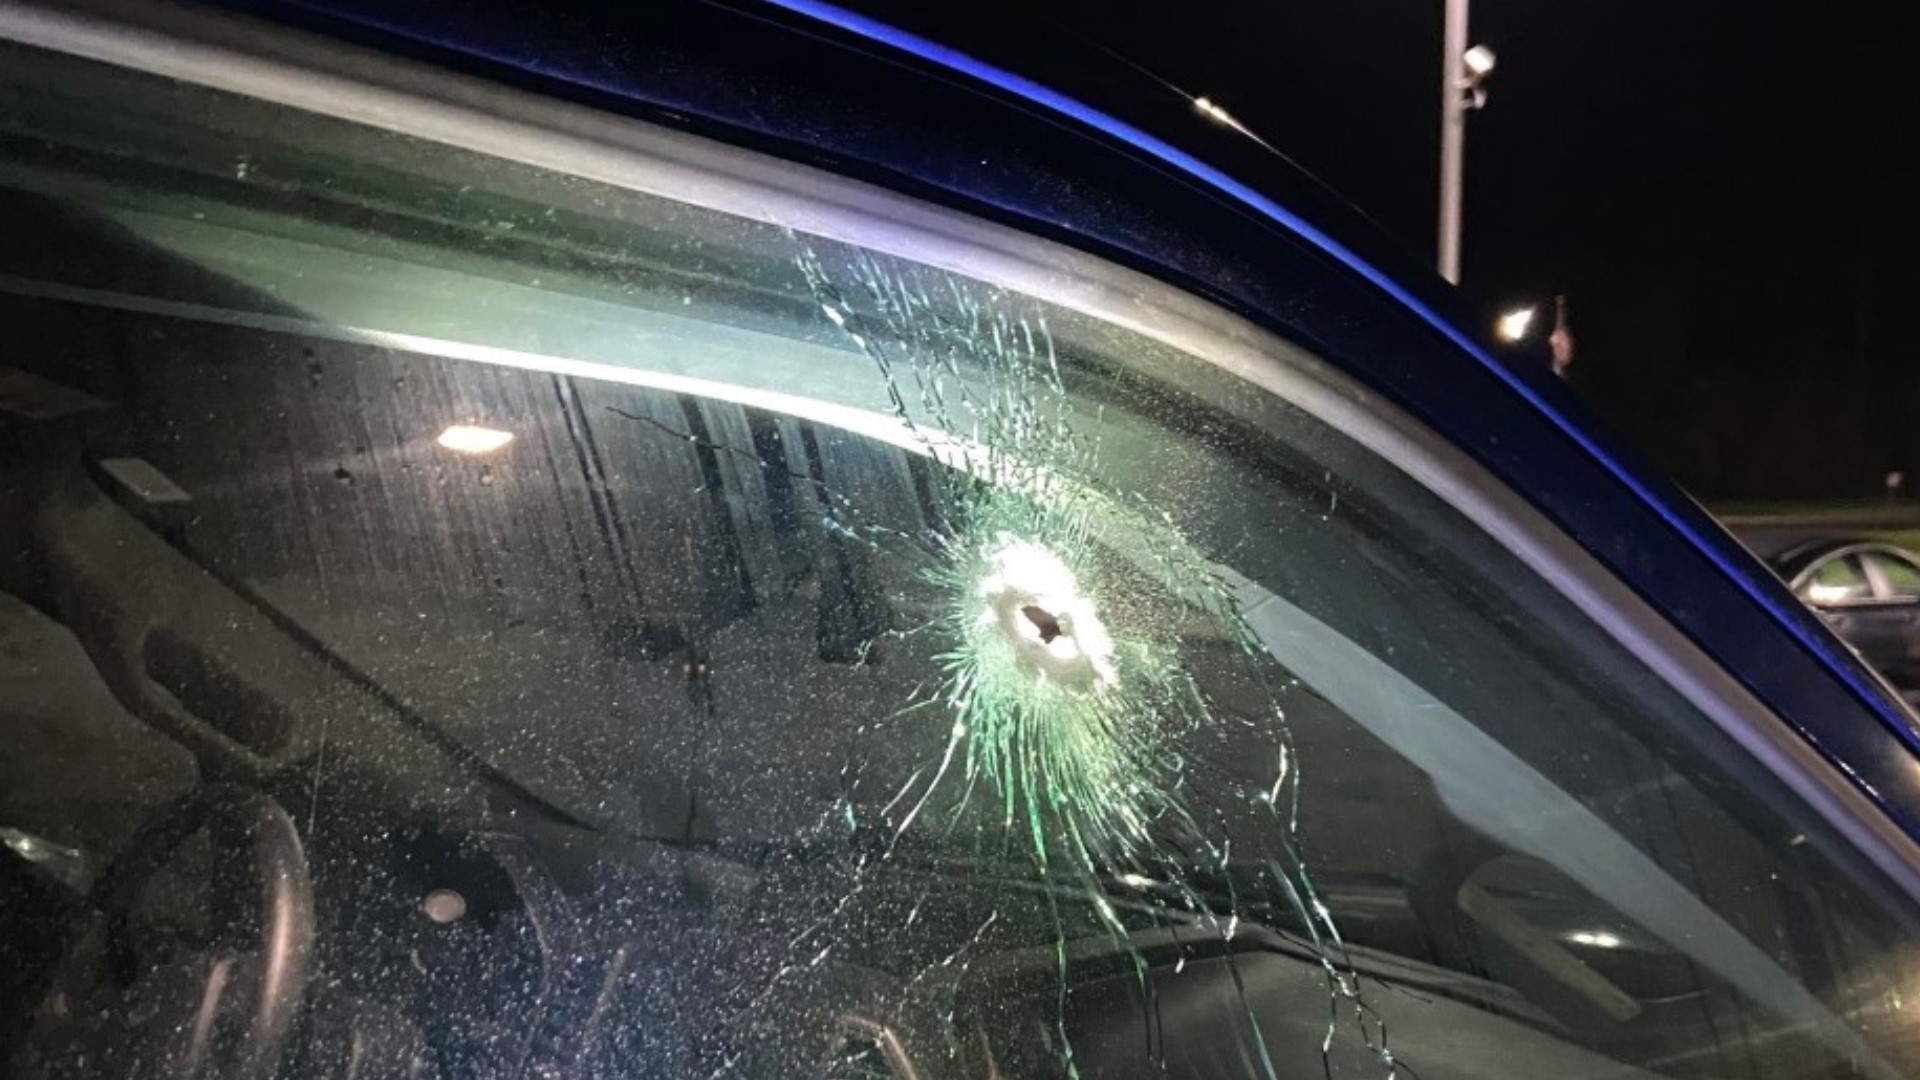 During a search, deputies found that the north side of the Sheriff’s Office building, two personal vehicles and one cruiser had all been struck by gunfire.